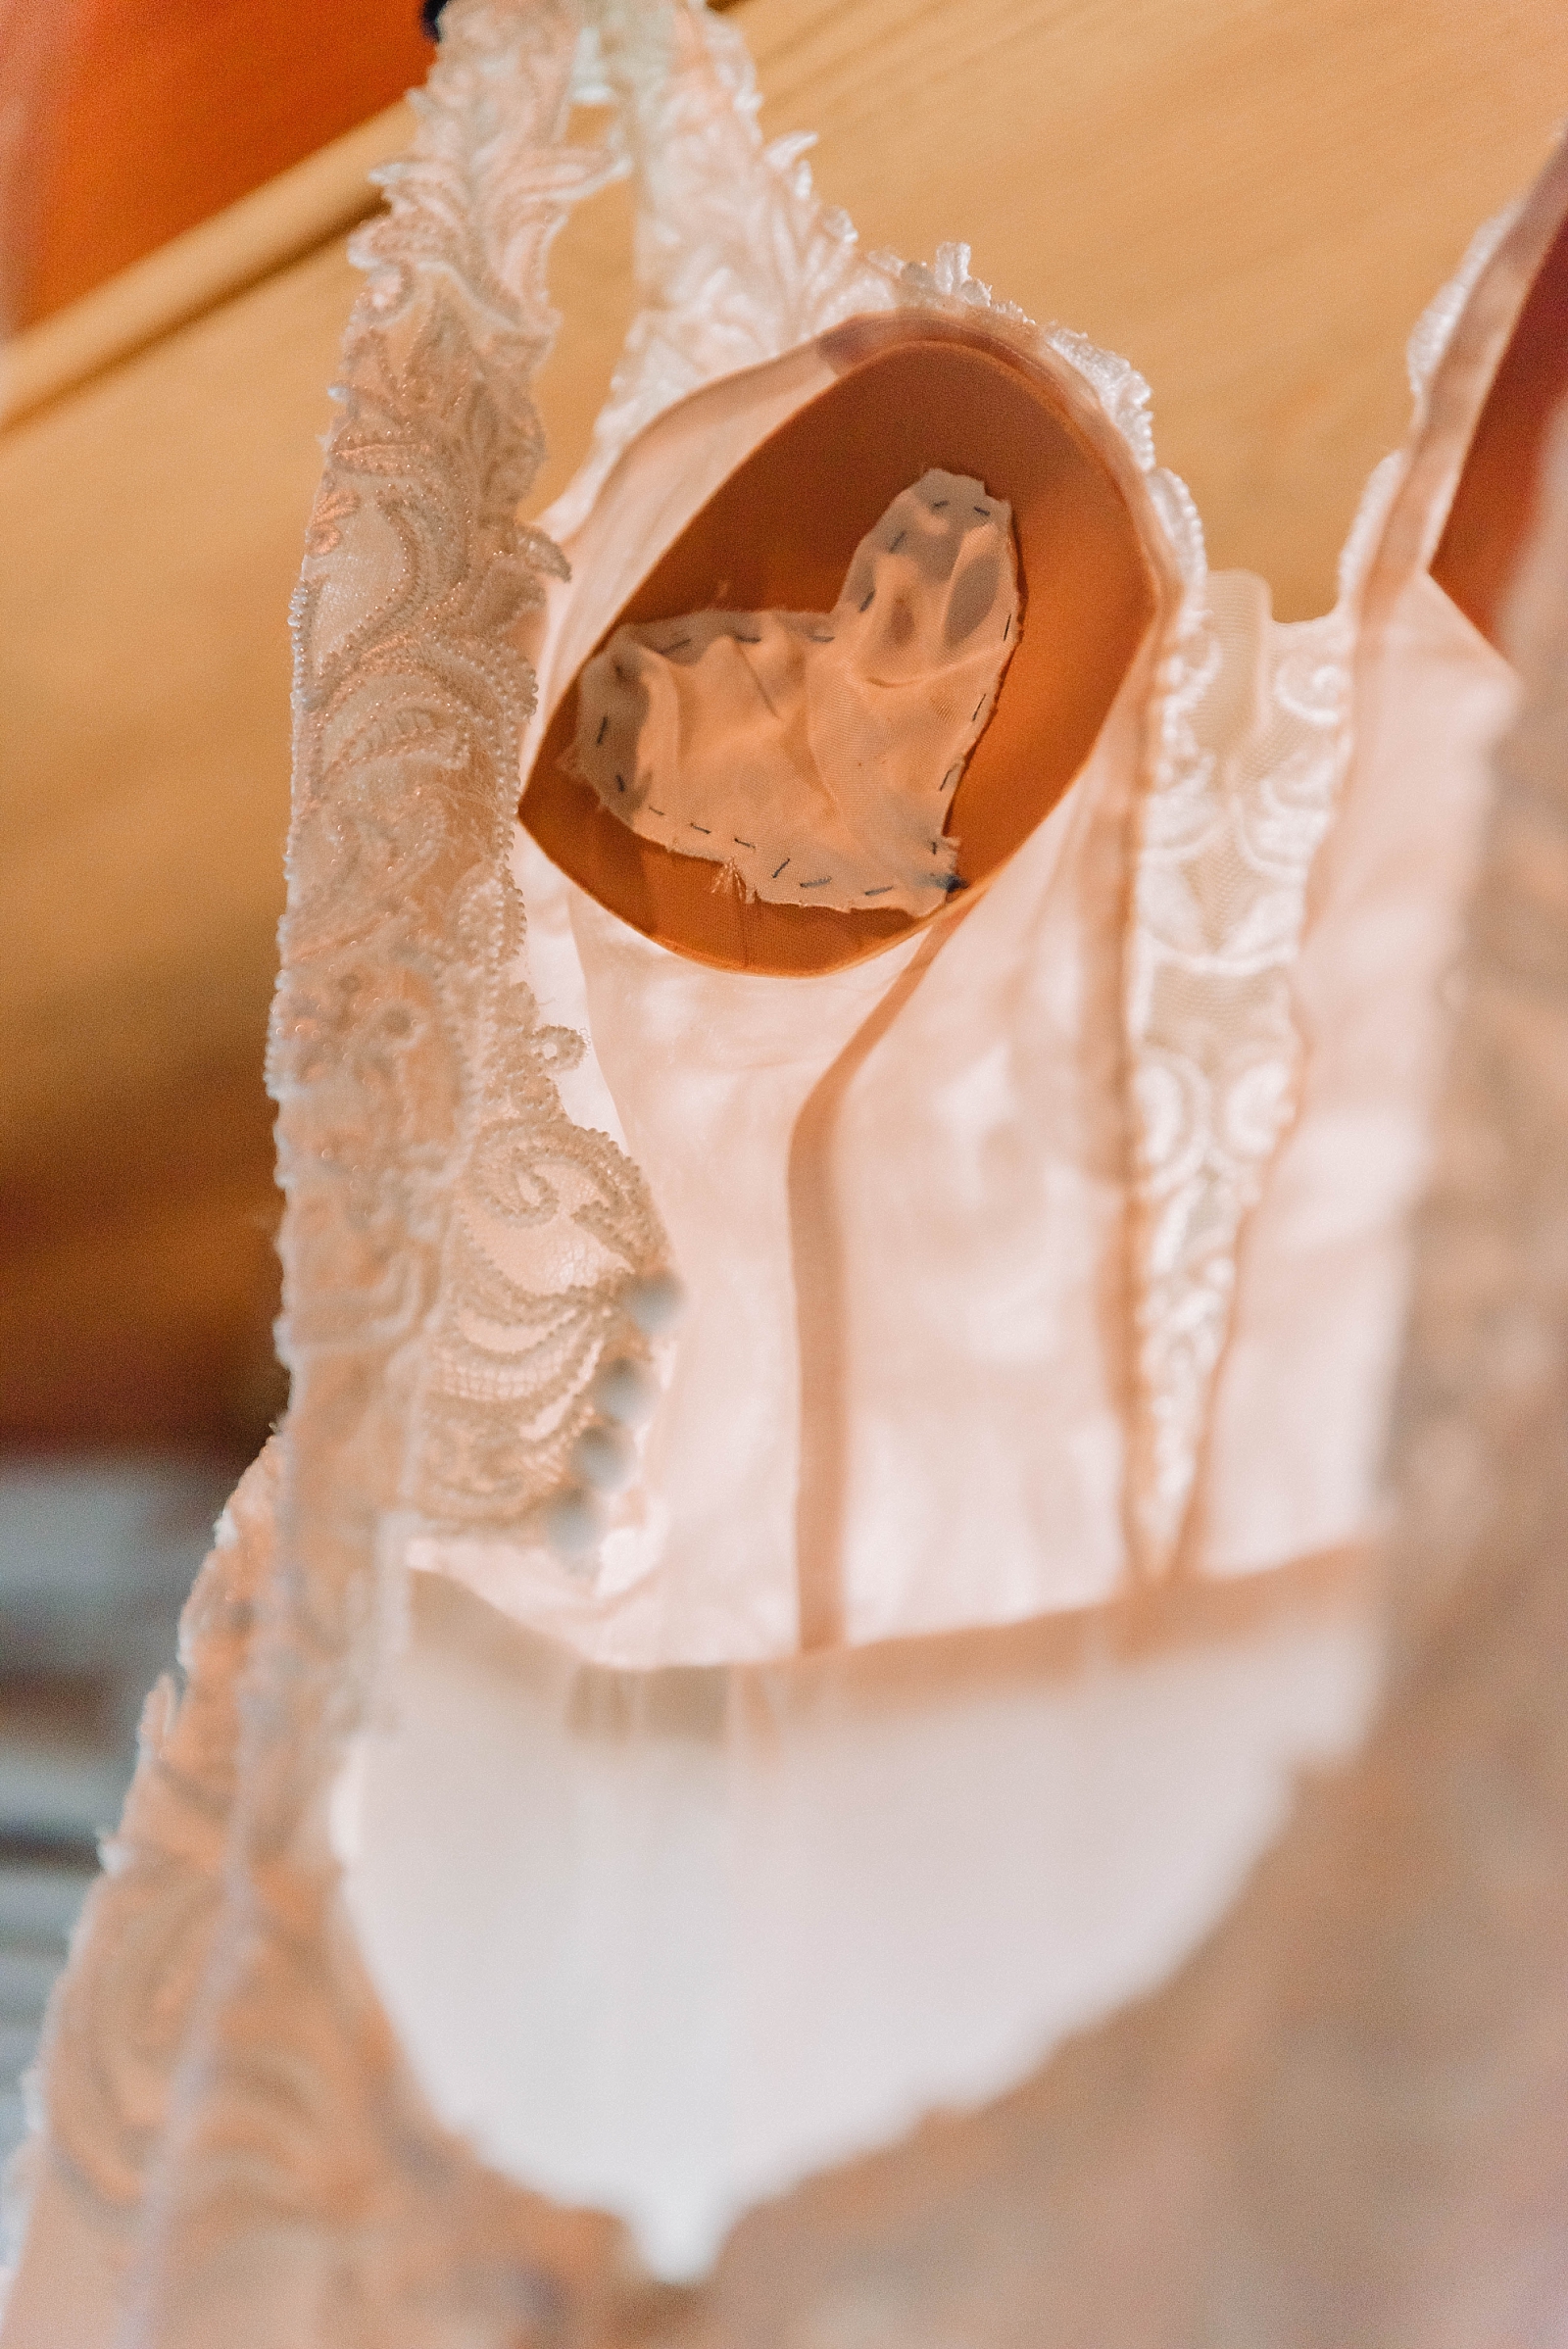 Bride's dress with heart of fabric from mother's wedding gown sewed in over her heart to keep her with her